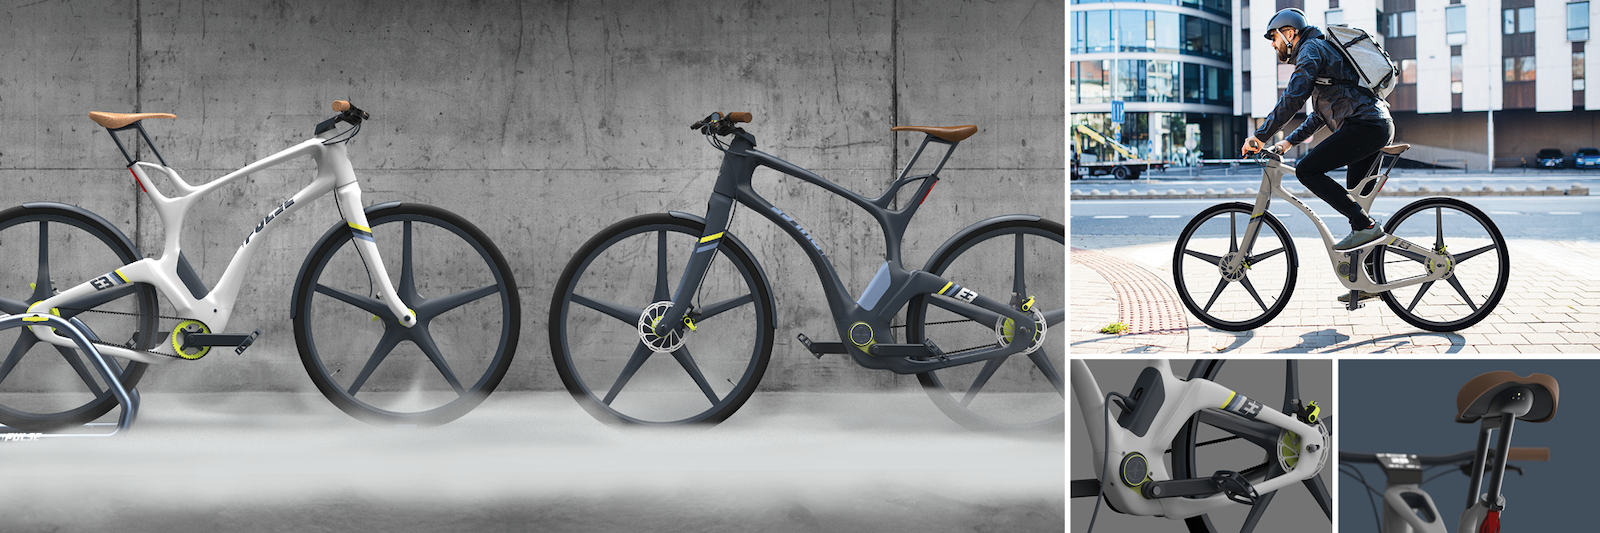 Several renders of bikes, both on display and in use. 